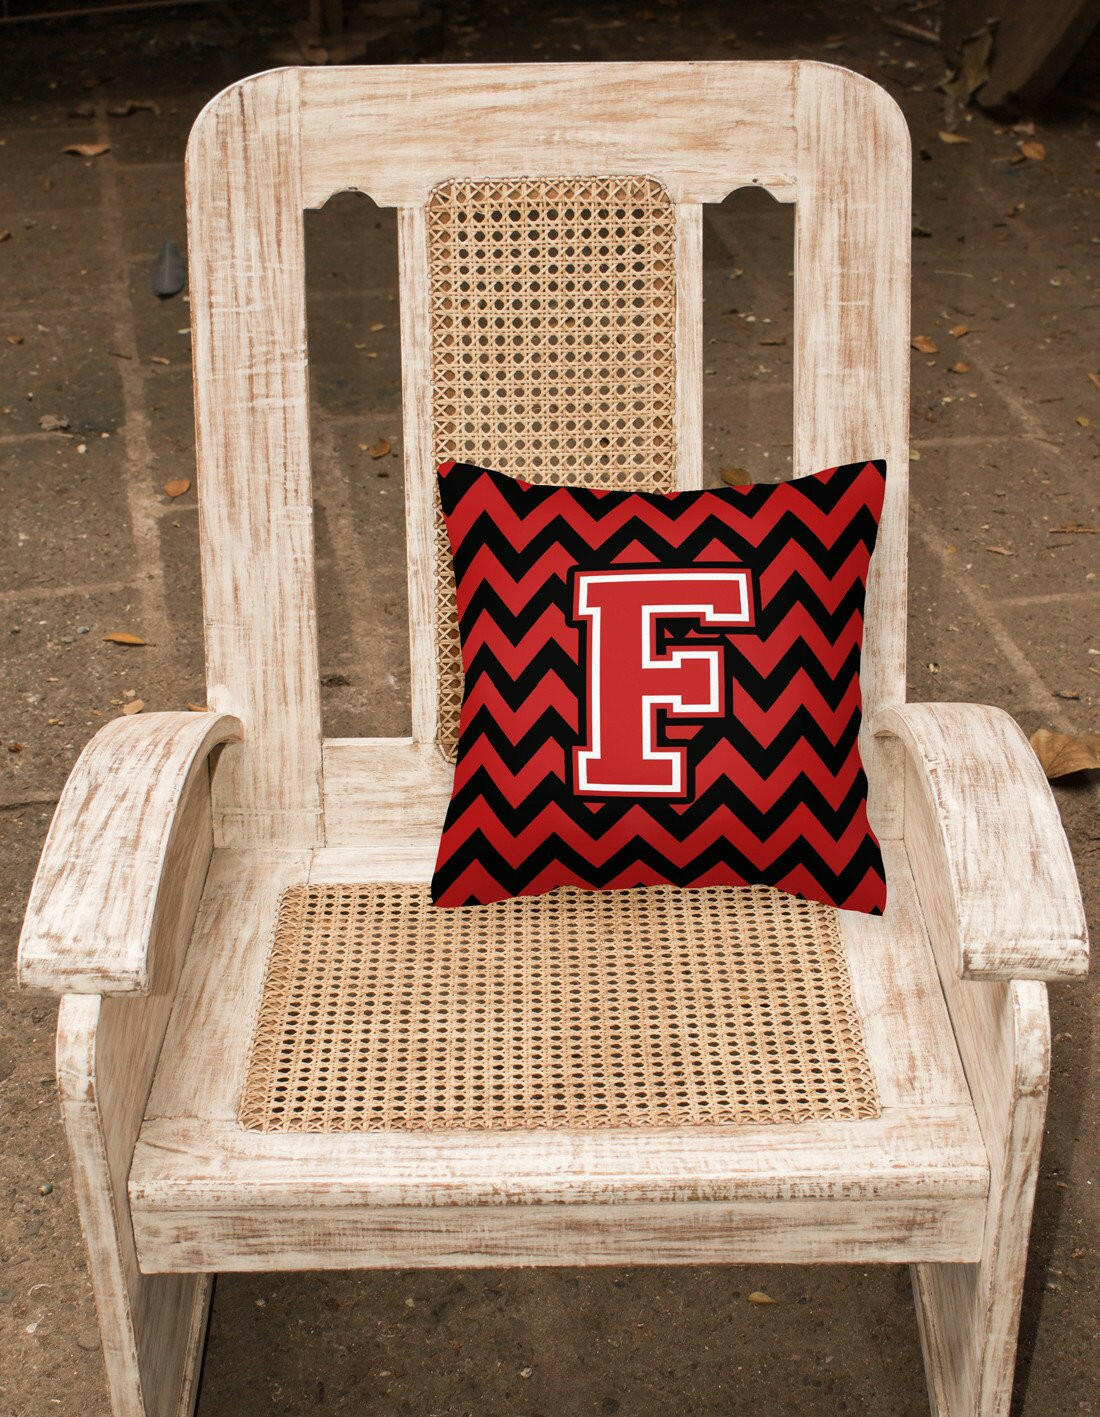 Letter F Chevron Black and Red   Fabric Decorative Pillow CJ1047-FPW1414 by Caroline's Treasures